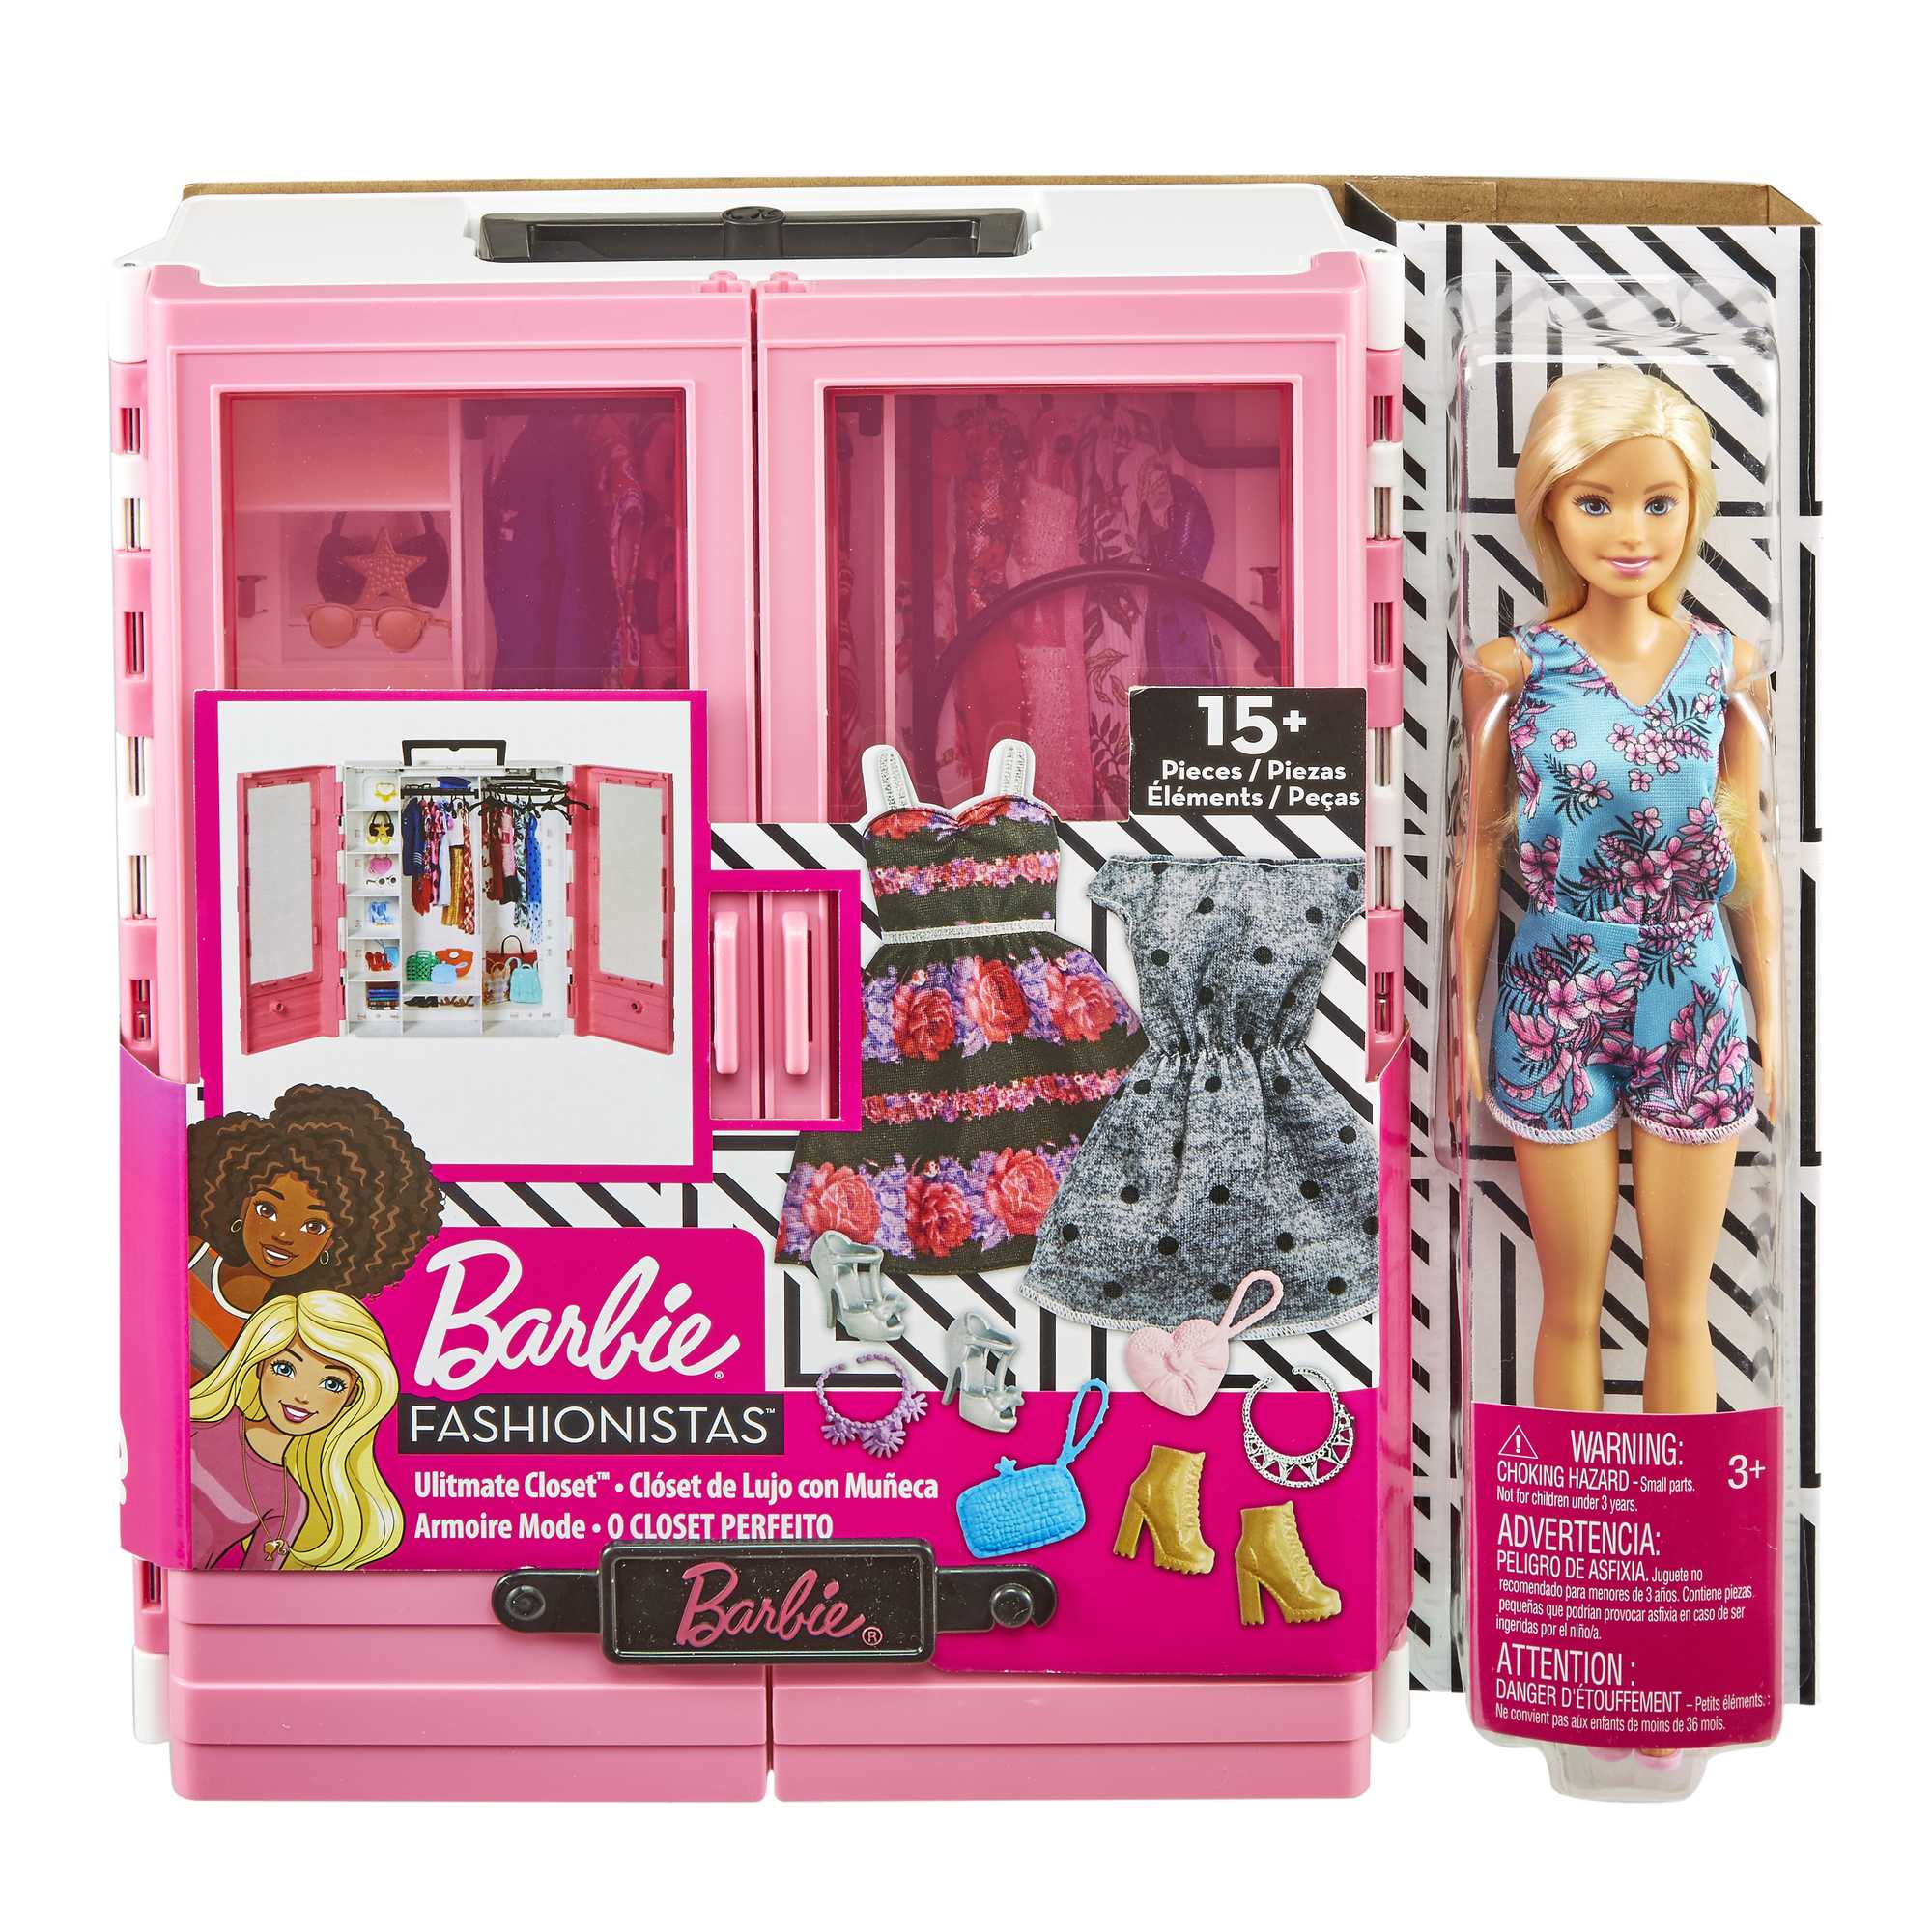 Barbie Fashionistas Ultimate Closet Portable Fashion Toy with Doll, Clothing,  Accessories and Hangers, Gift for 3 Years Old and Up, Playsets -   Canada